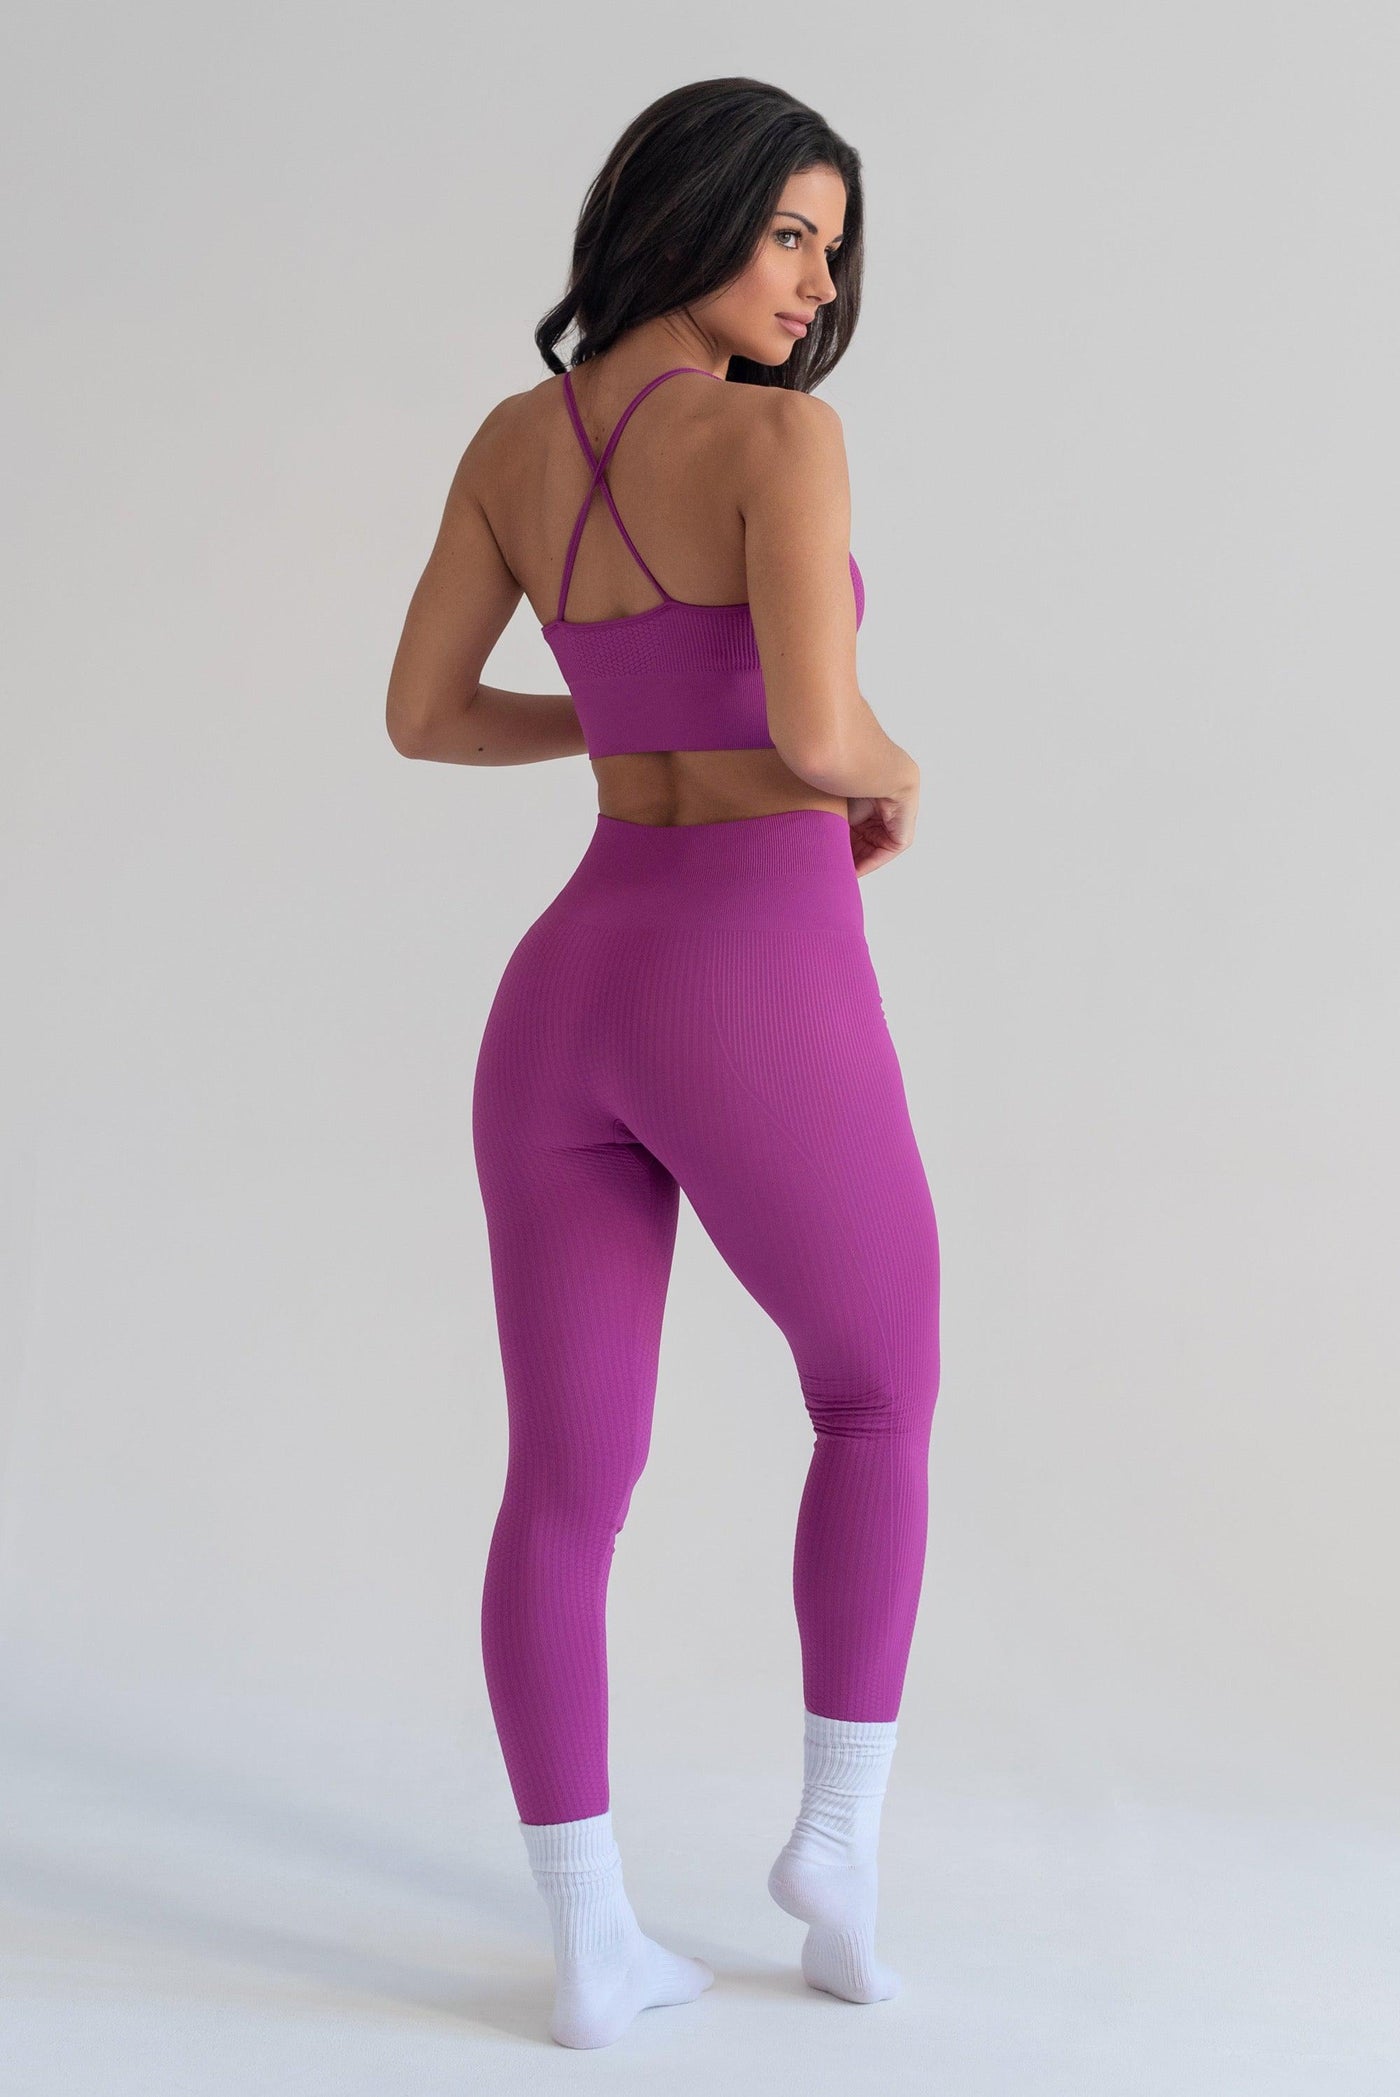 Flow Legging at Orquidea-Long Leggings-Shop Sustainable Recycled Yoga Leggings Women's Clothing On-line Barcelona Believe Athletics Sustainable Recycled Yoga Clothes